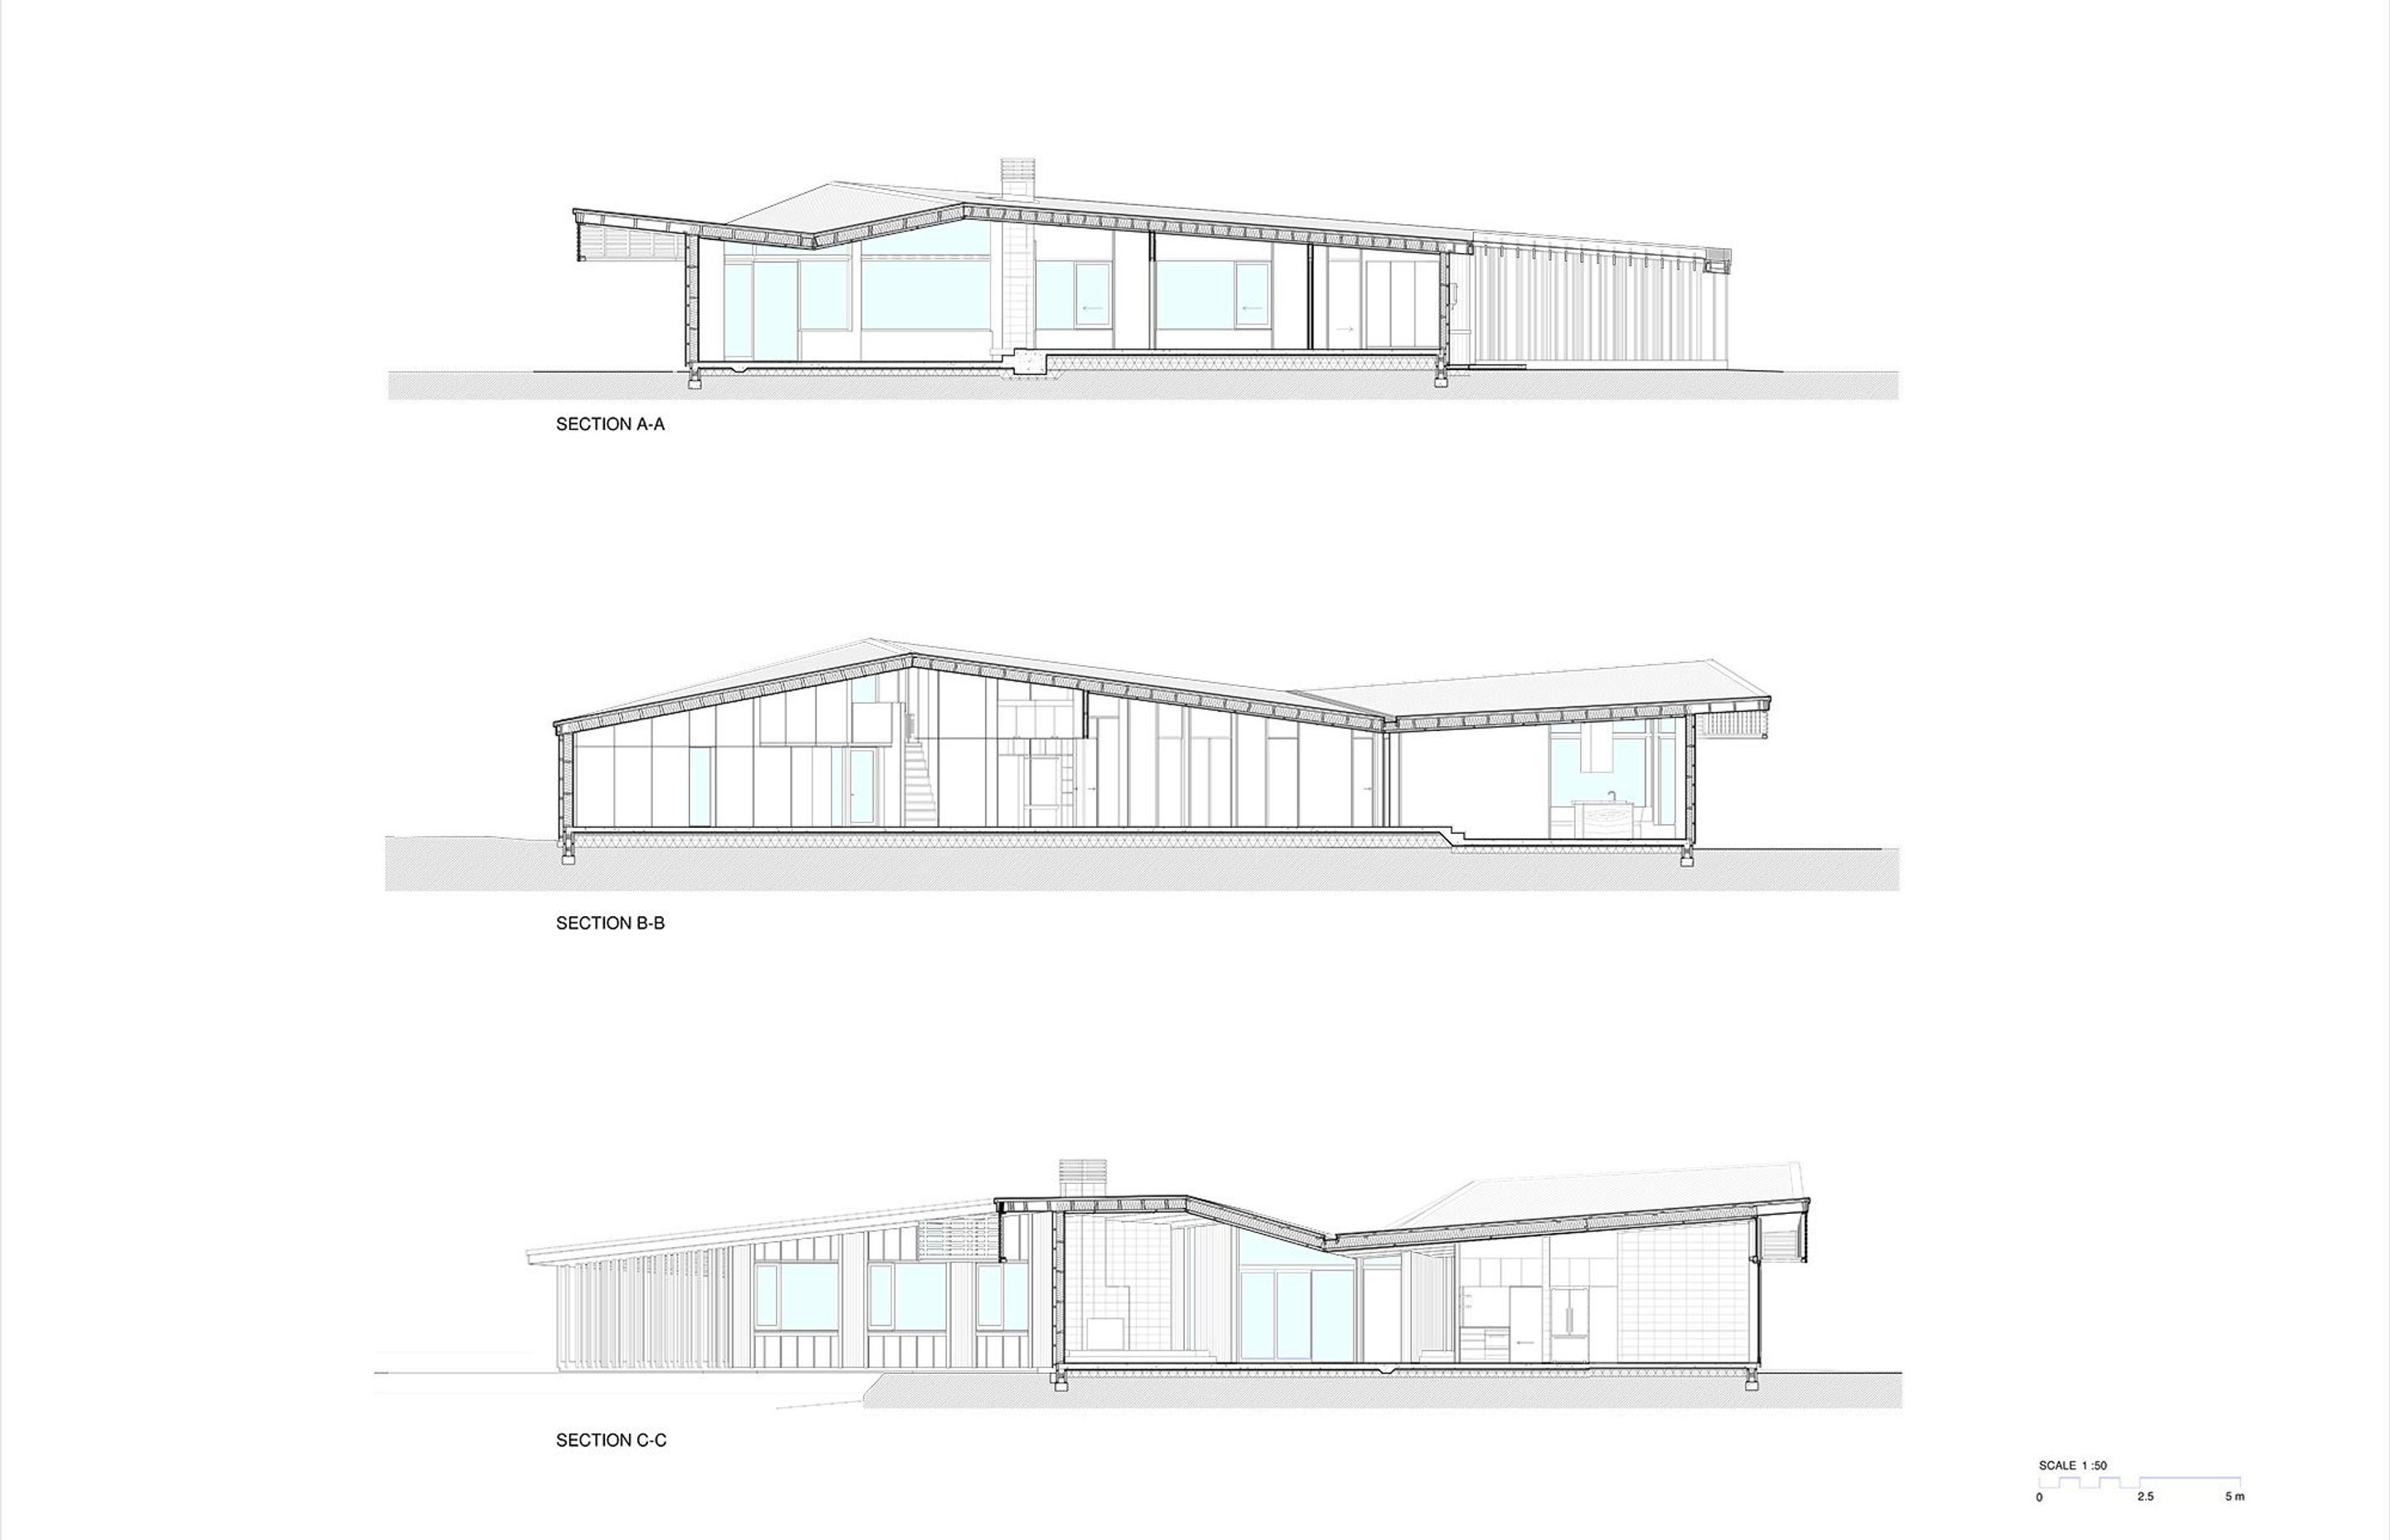 Cross sections of the house provide a sense of the form and the plen.